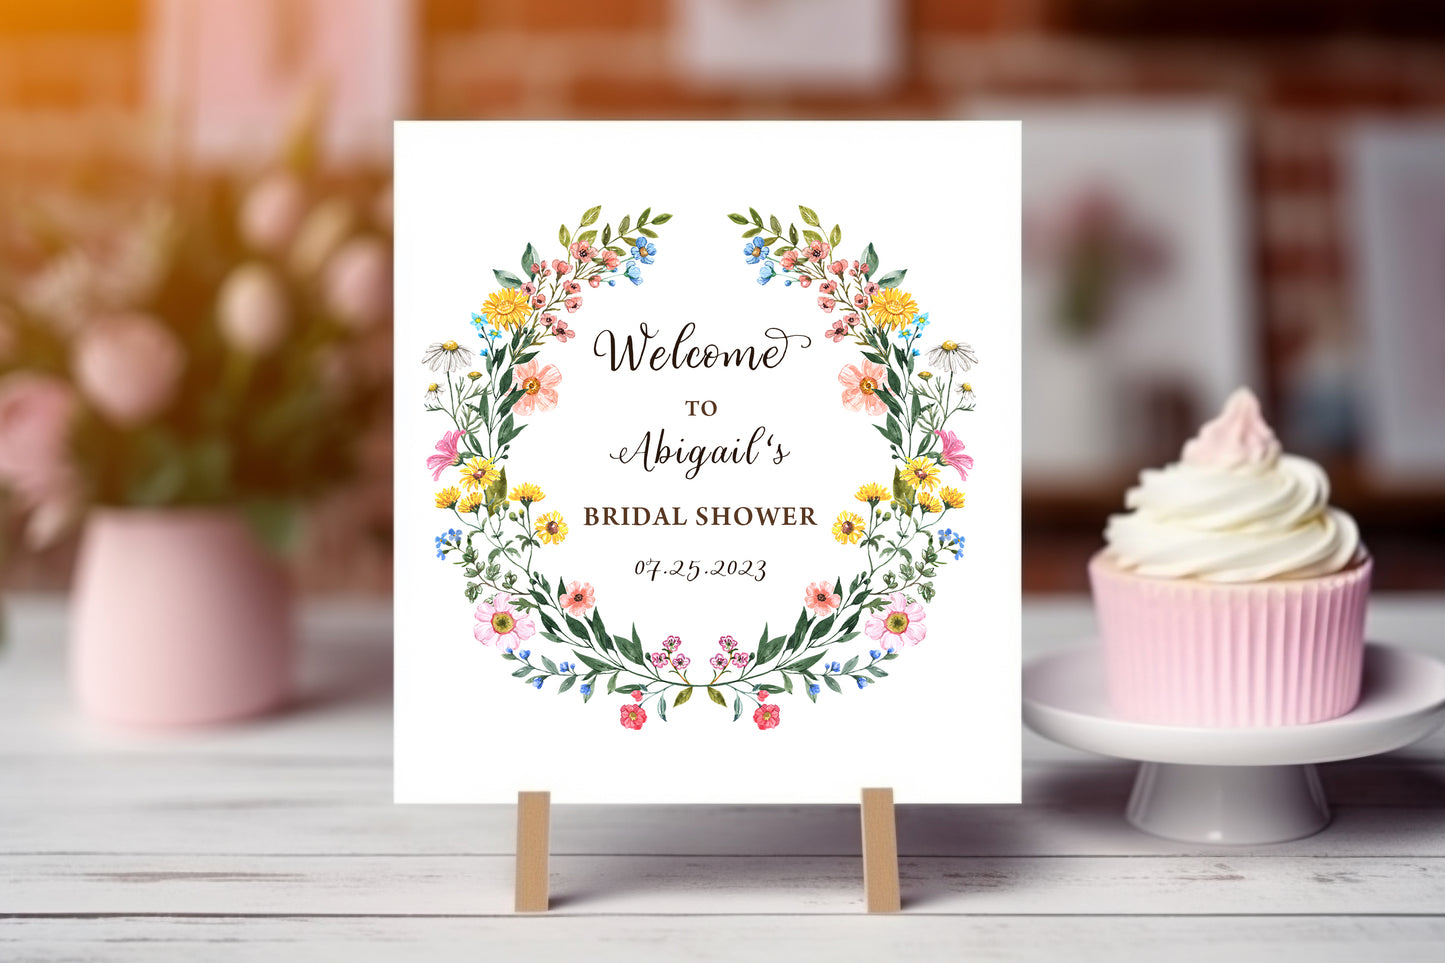 Watercolor Boho Wildflowers Frames and Wreaths clipart, watercolor wildflower clipart, wild flower frame, wildflower bridak shower welcome sign